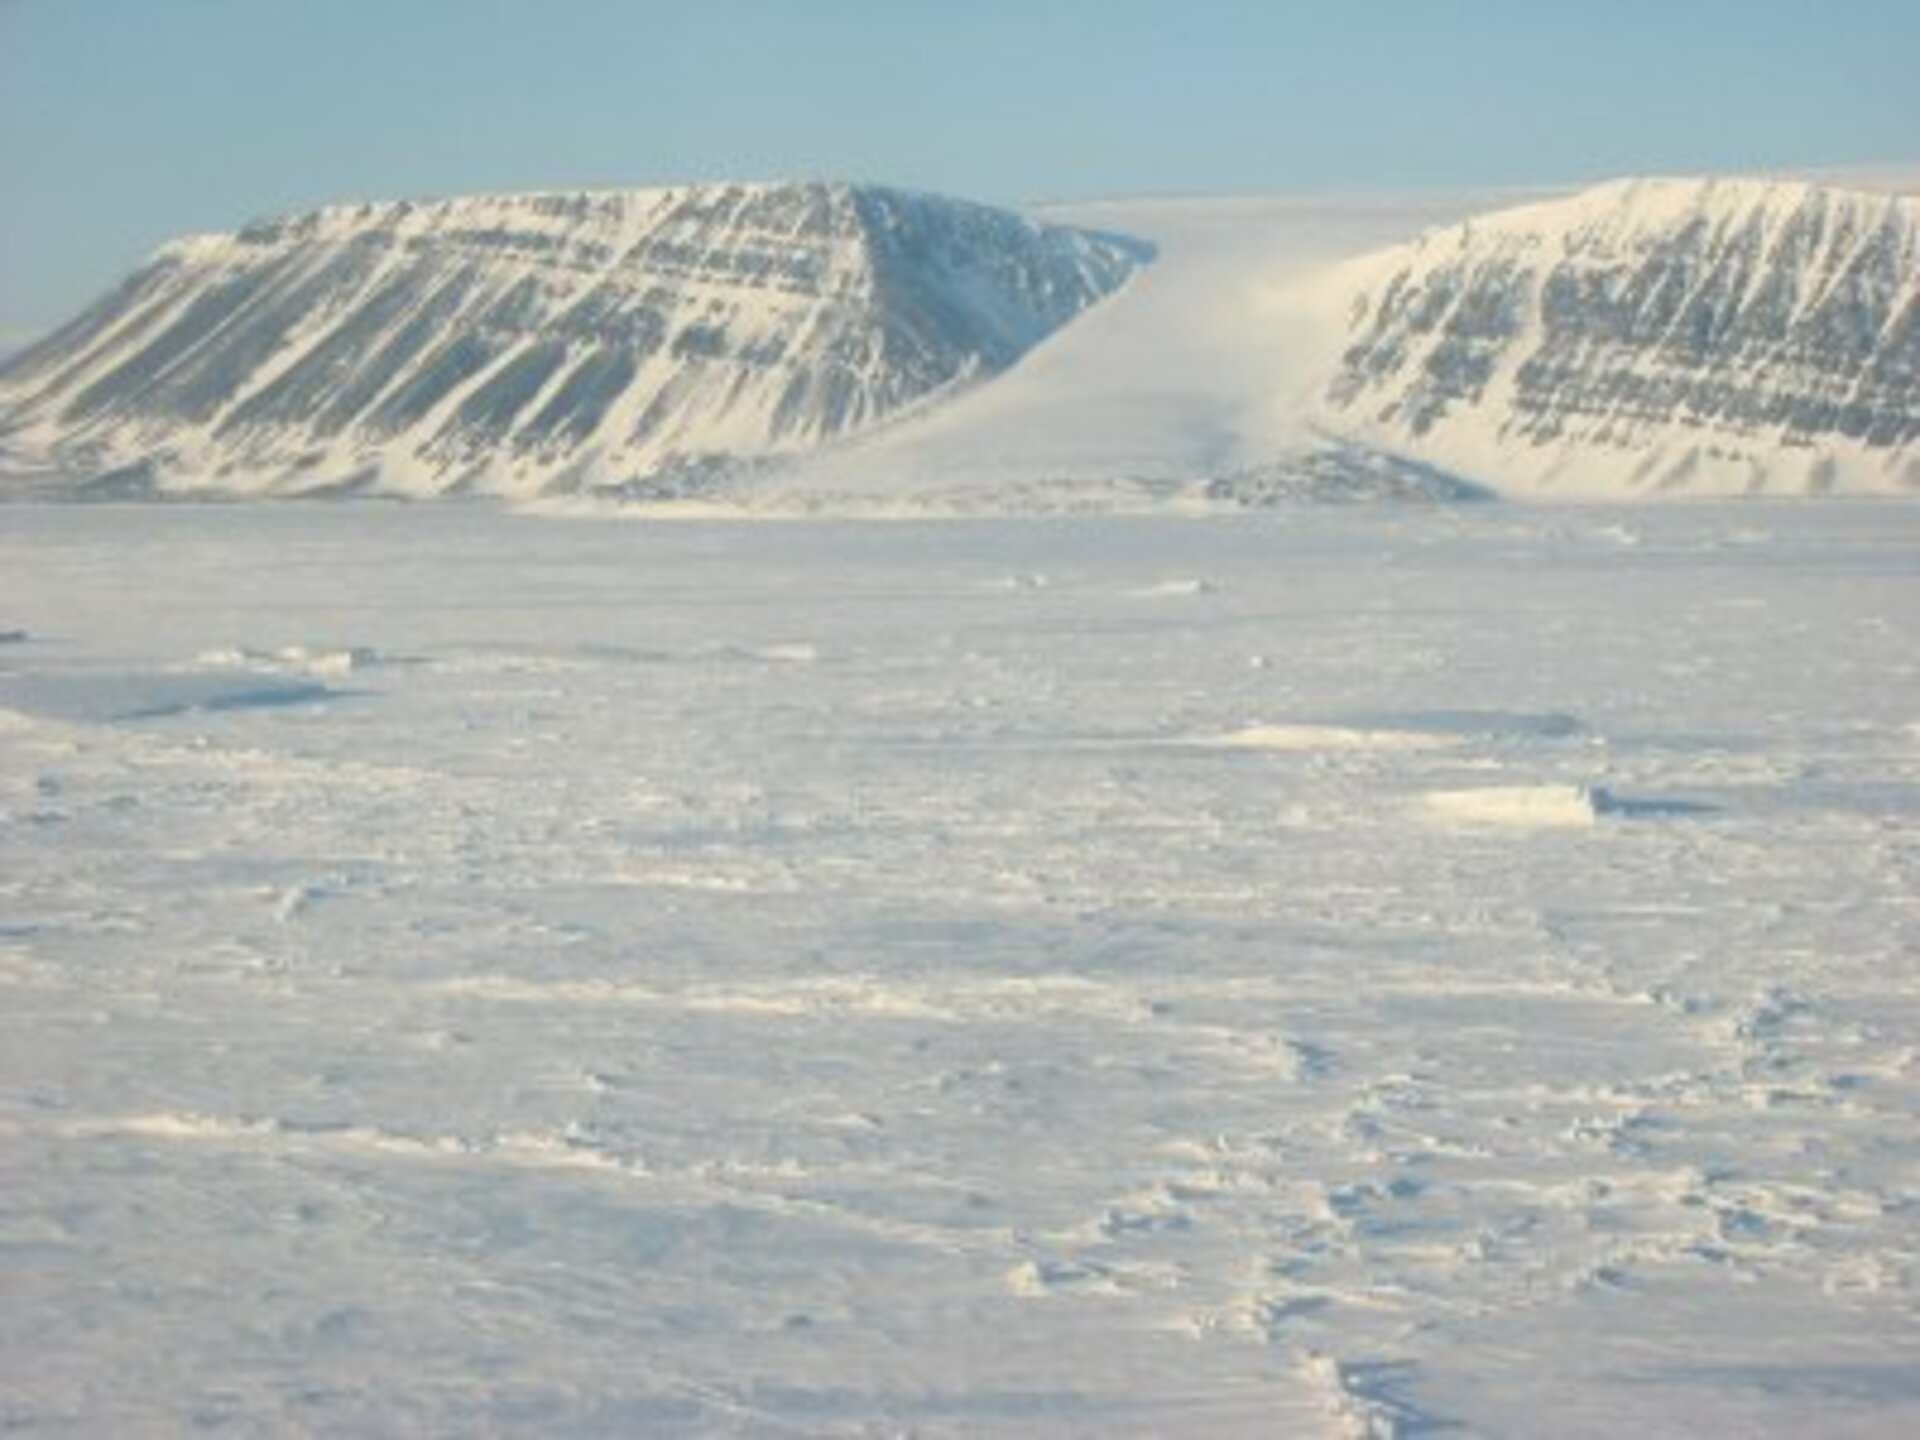 Land and sea ice in the Arctic